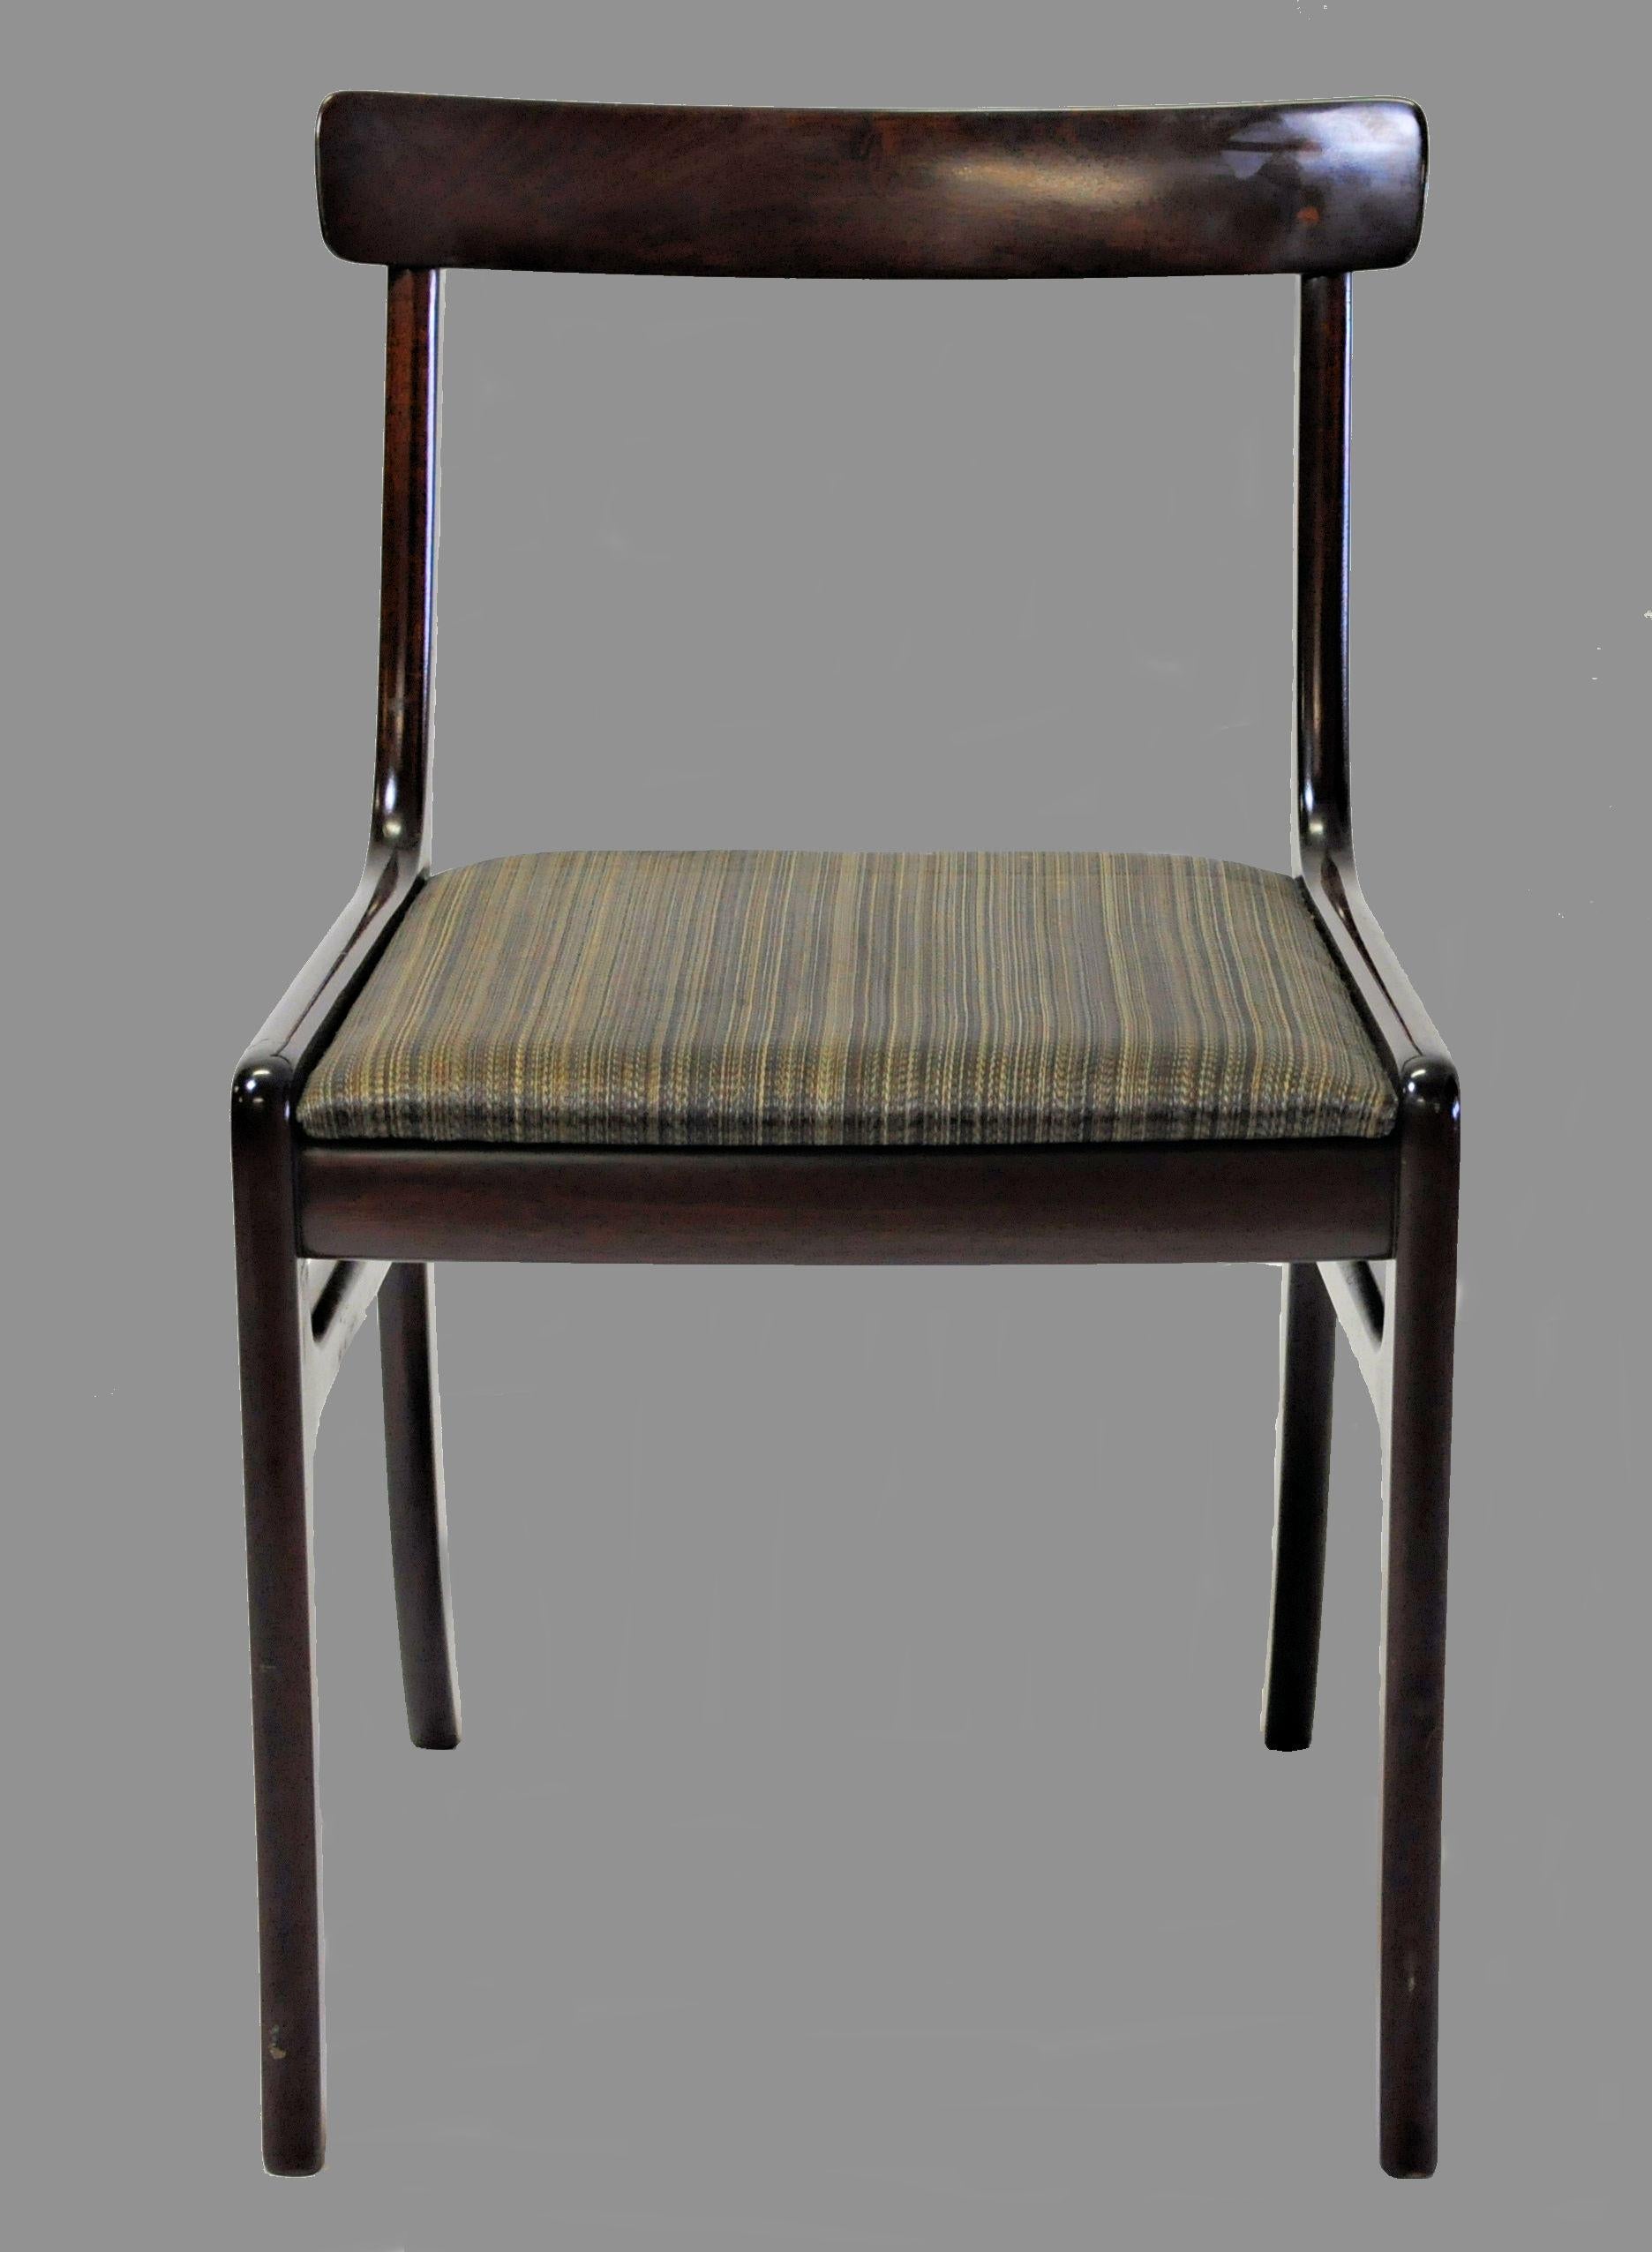 This set of eight mahogany Rungstedlund dining chairs designed by Ole Wanscher were produced during the 1960s and 1970s by Poul Jeppesen Furniture. 

The dining chairs are part of the Rungstedlund dining furniture series designed by Ole Wanscher and